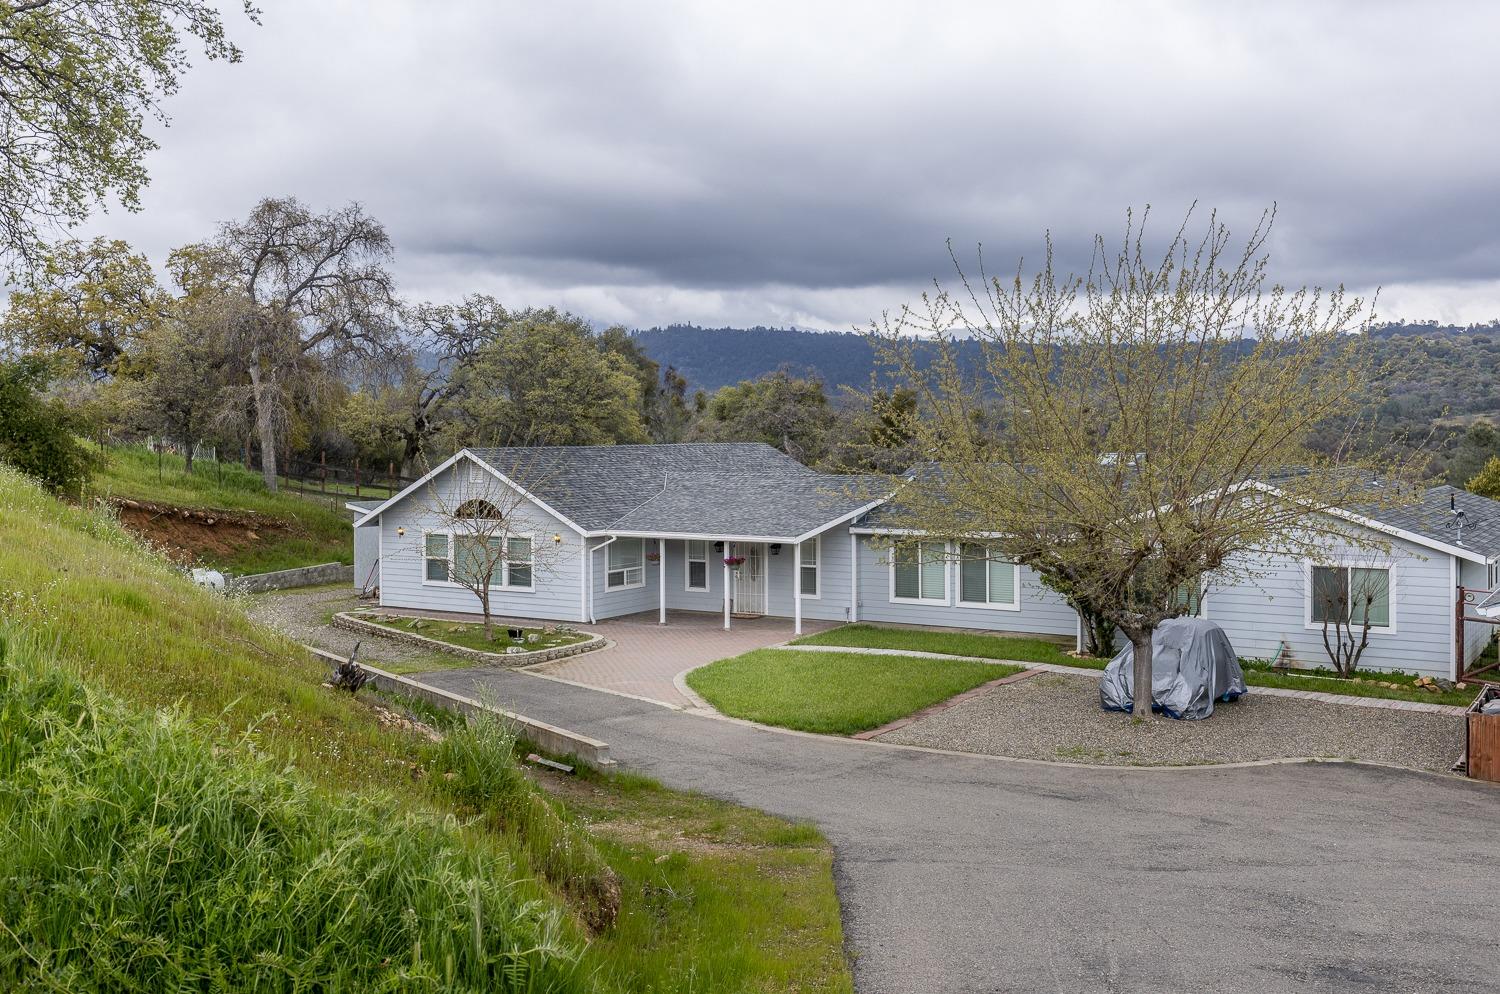 Photo of 3576 Hilltop Dr in Mariposa, CA